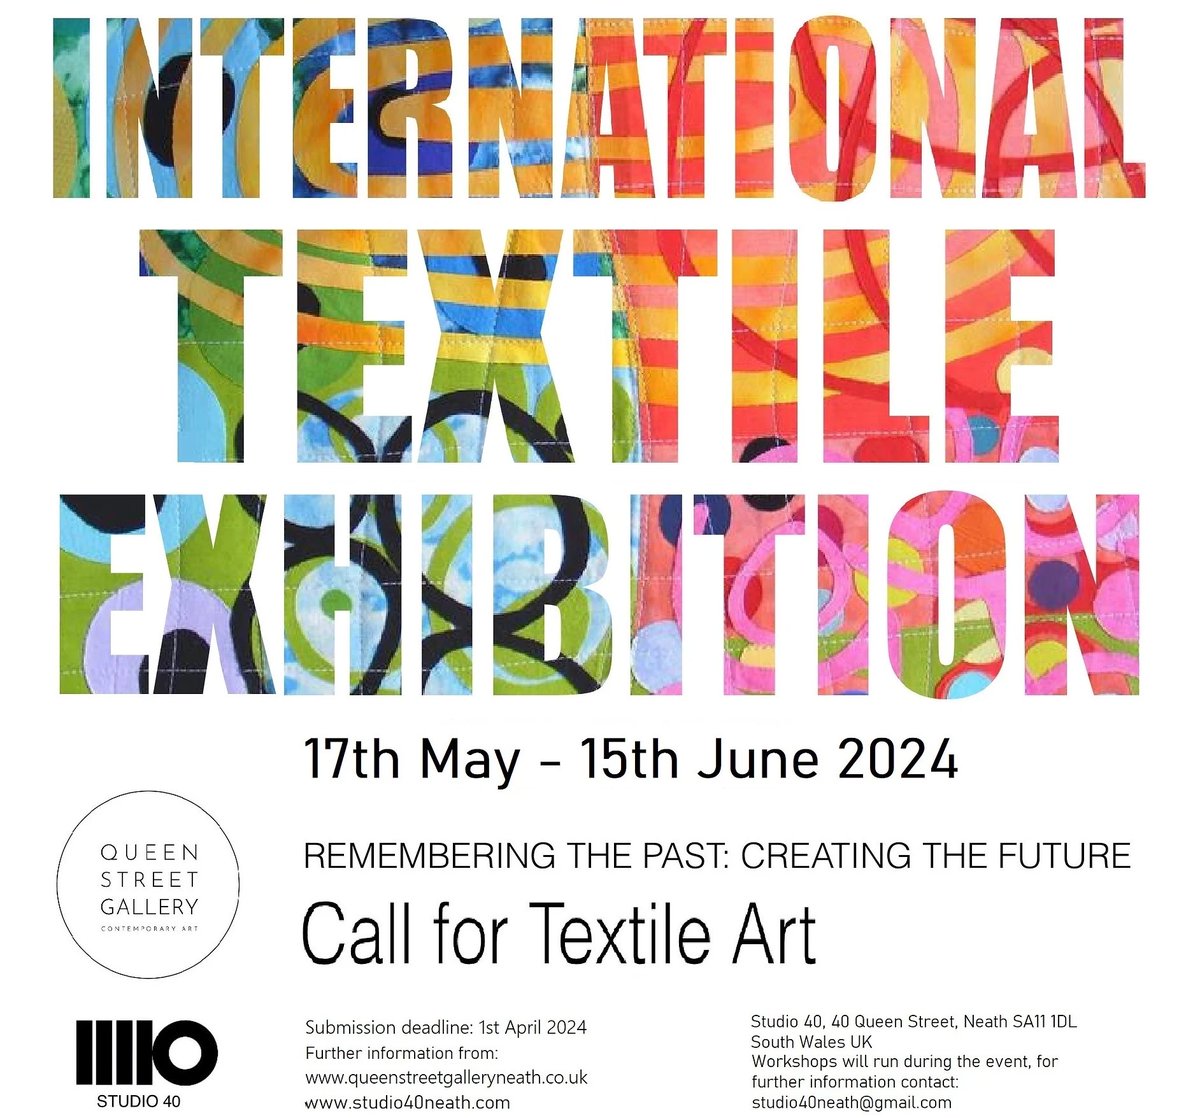 Attention all textile artists, designers, and creative individuals! We are thrilled to announce an exciting opportunity to participate in an international textile exhibition inspired by the theme 'Creating the Future: Remembering the Past.'
#textiles #callforart #artgallery